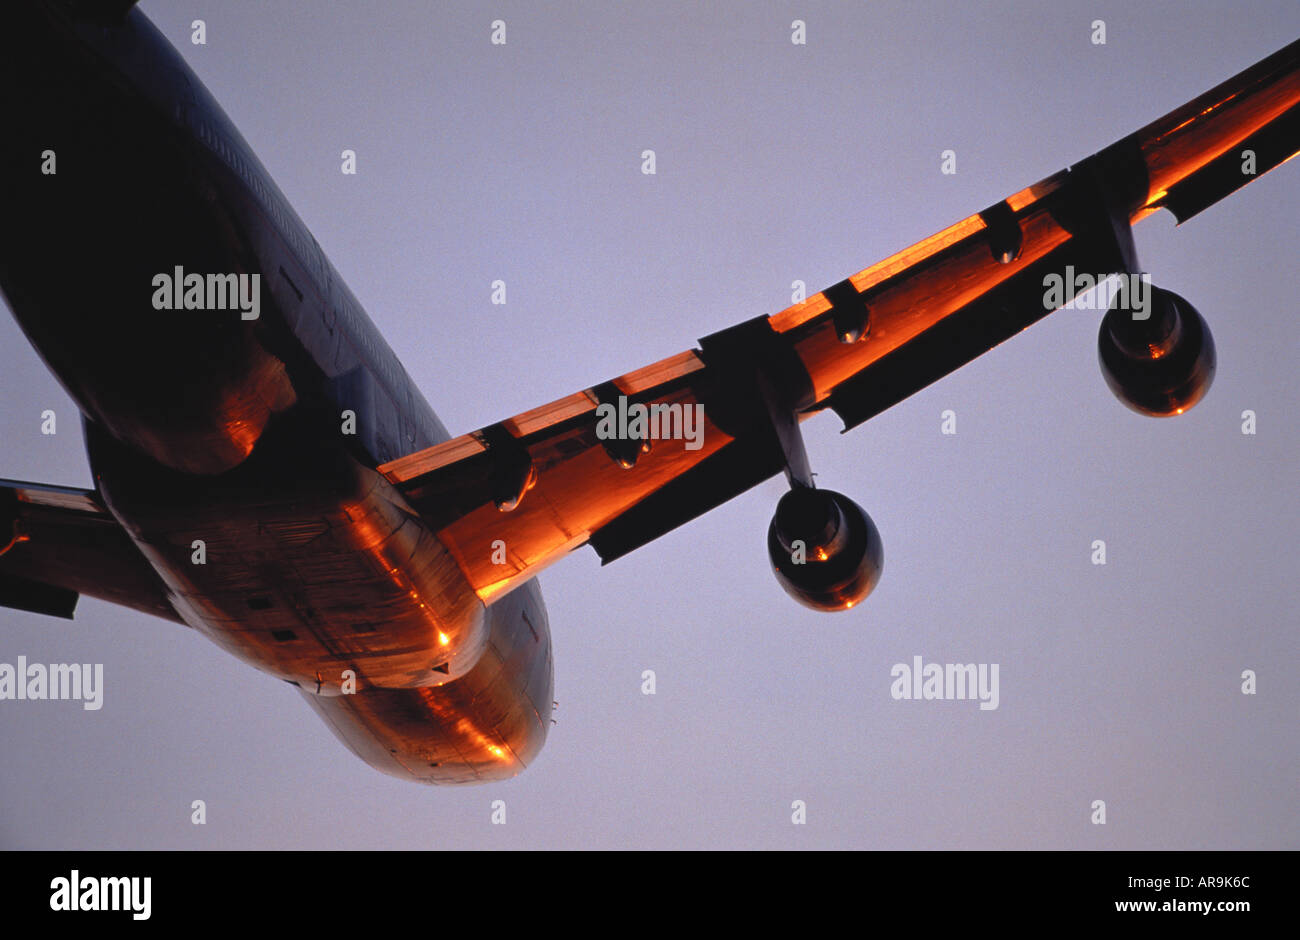 Boeing 747 in the air flying at sunset Stock Photo